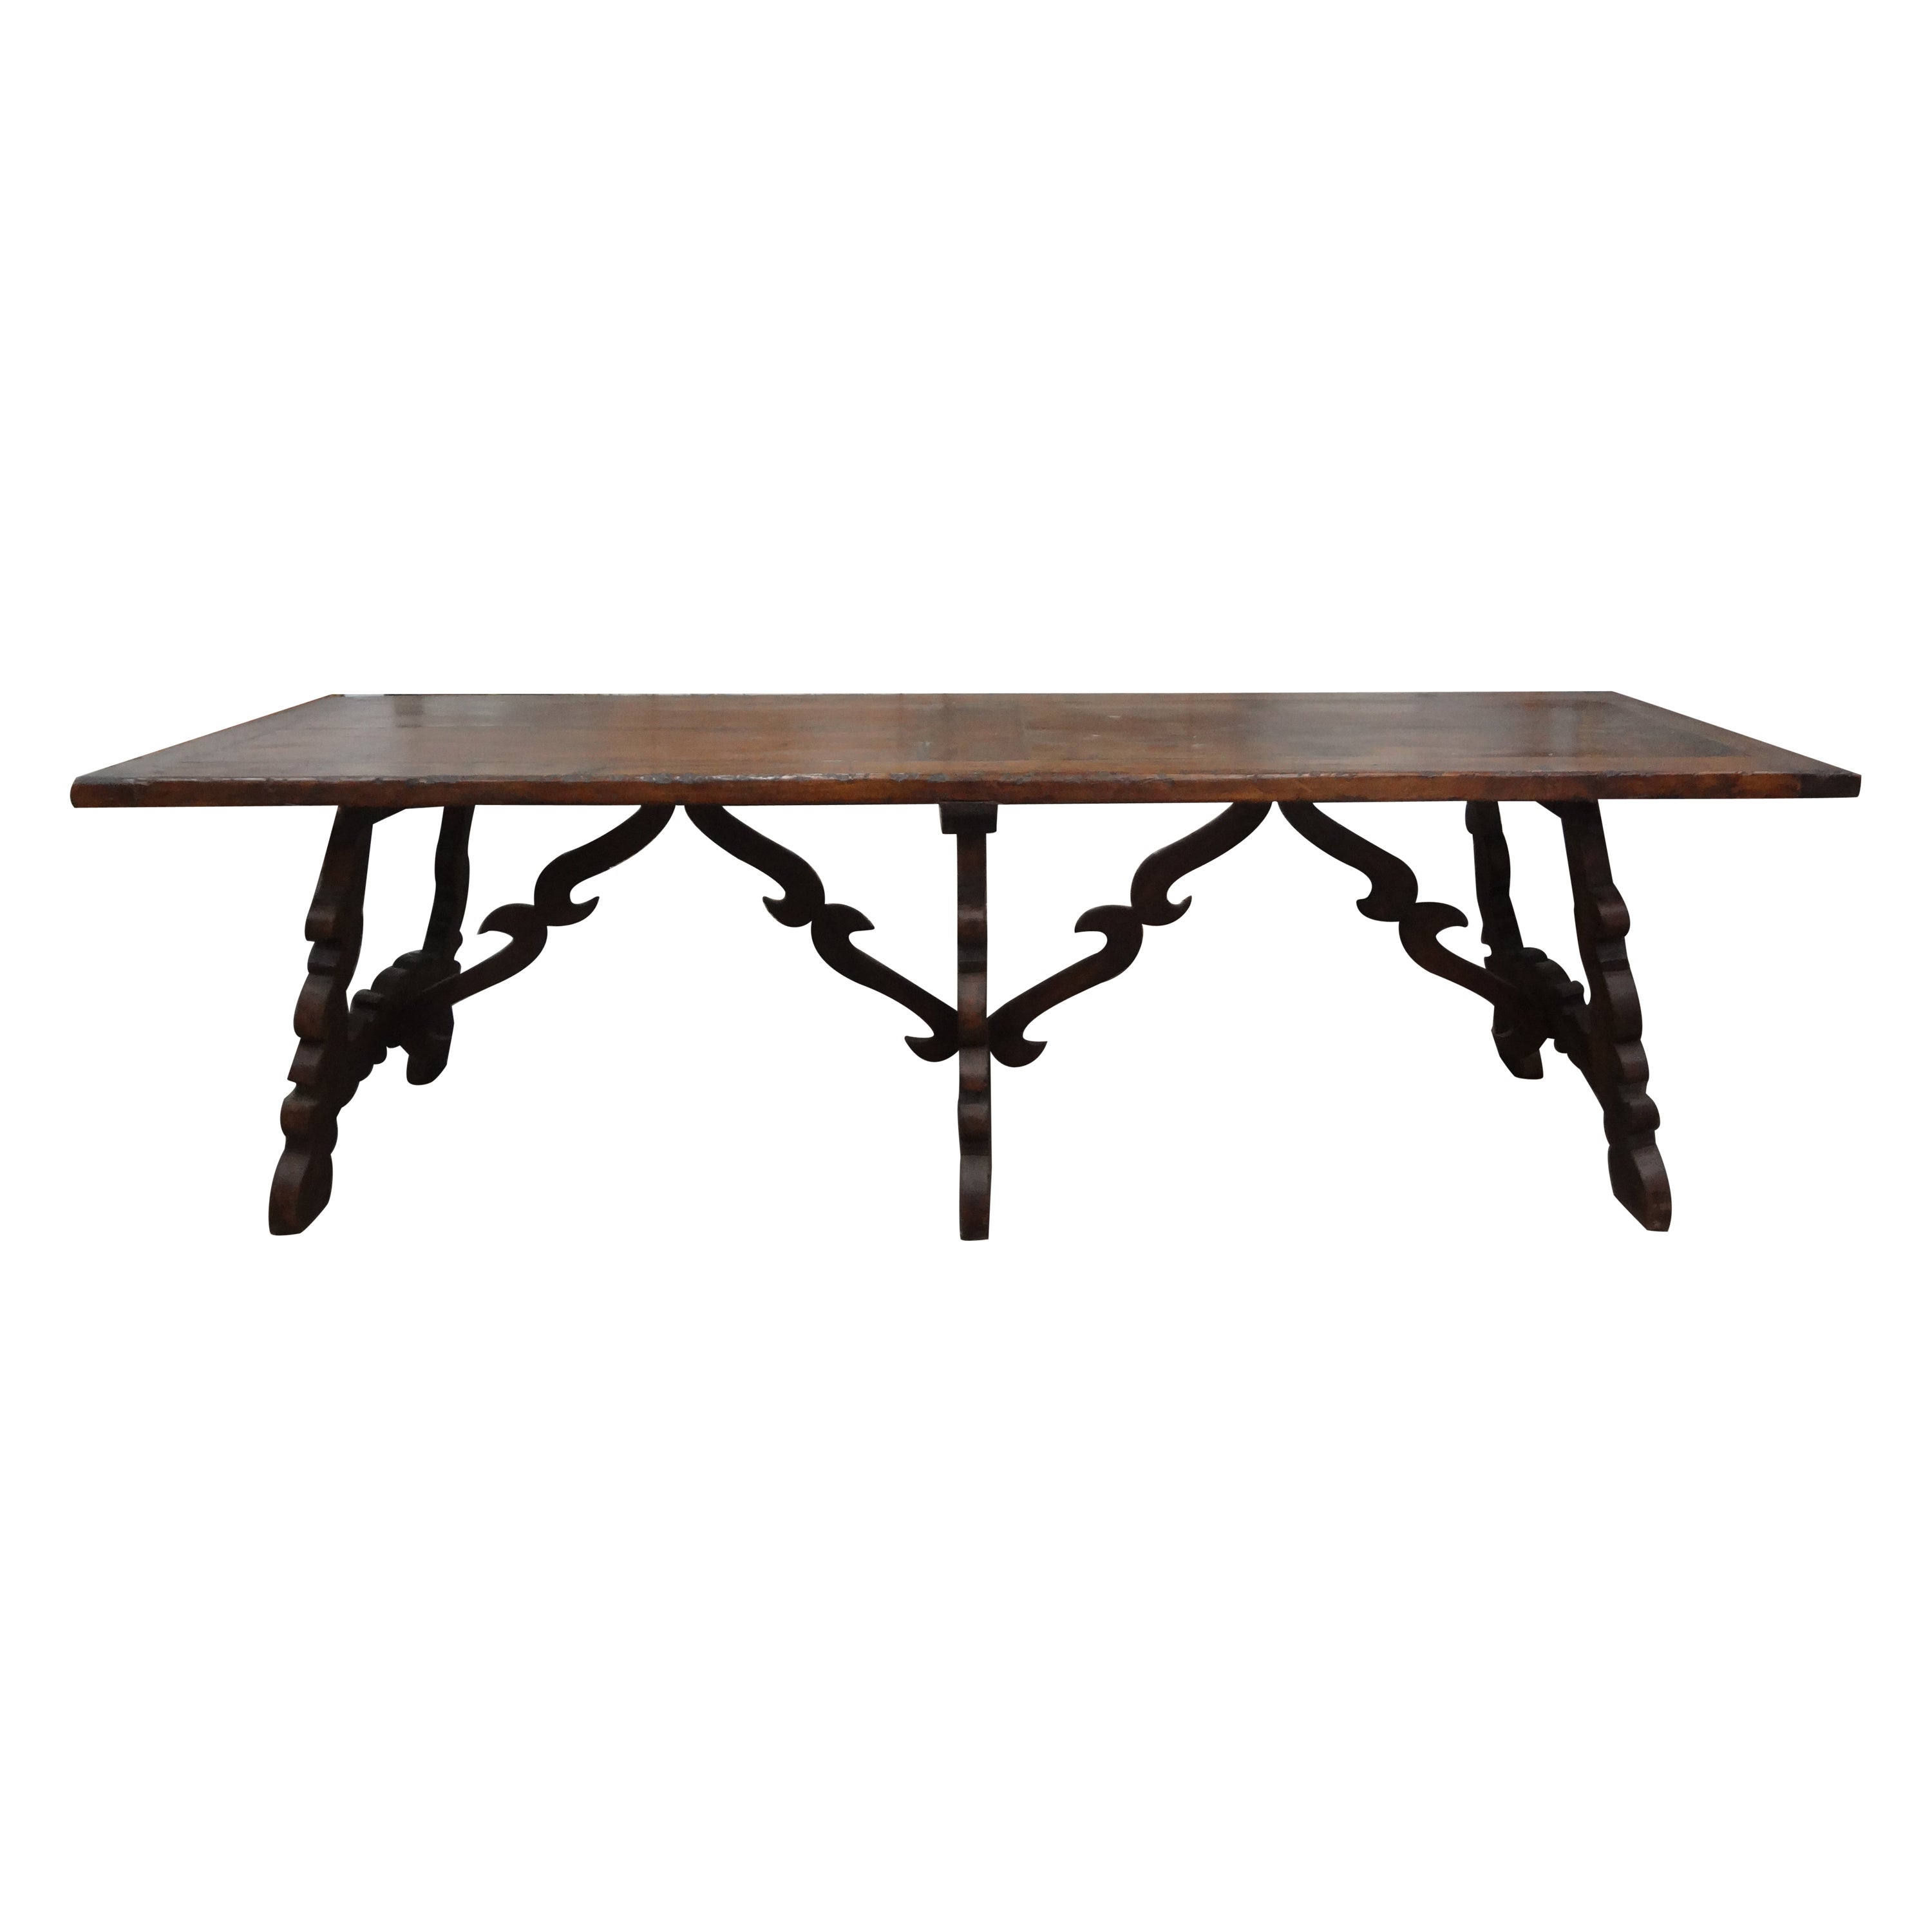 Late 18th-Early 19th Century Italian Walnut Dining Table For Sale